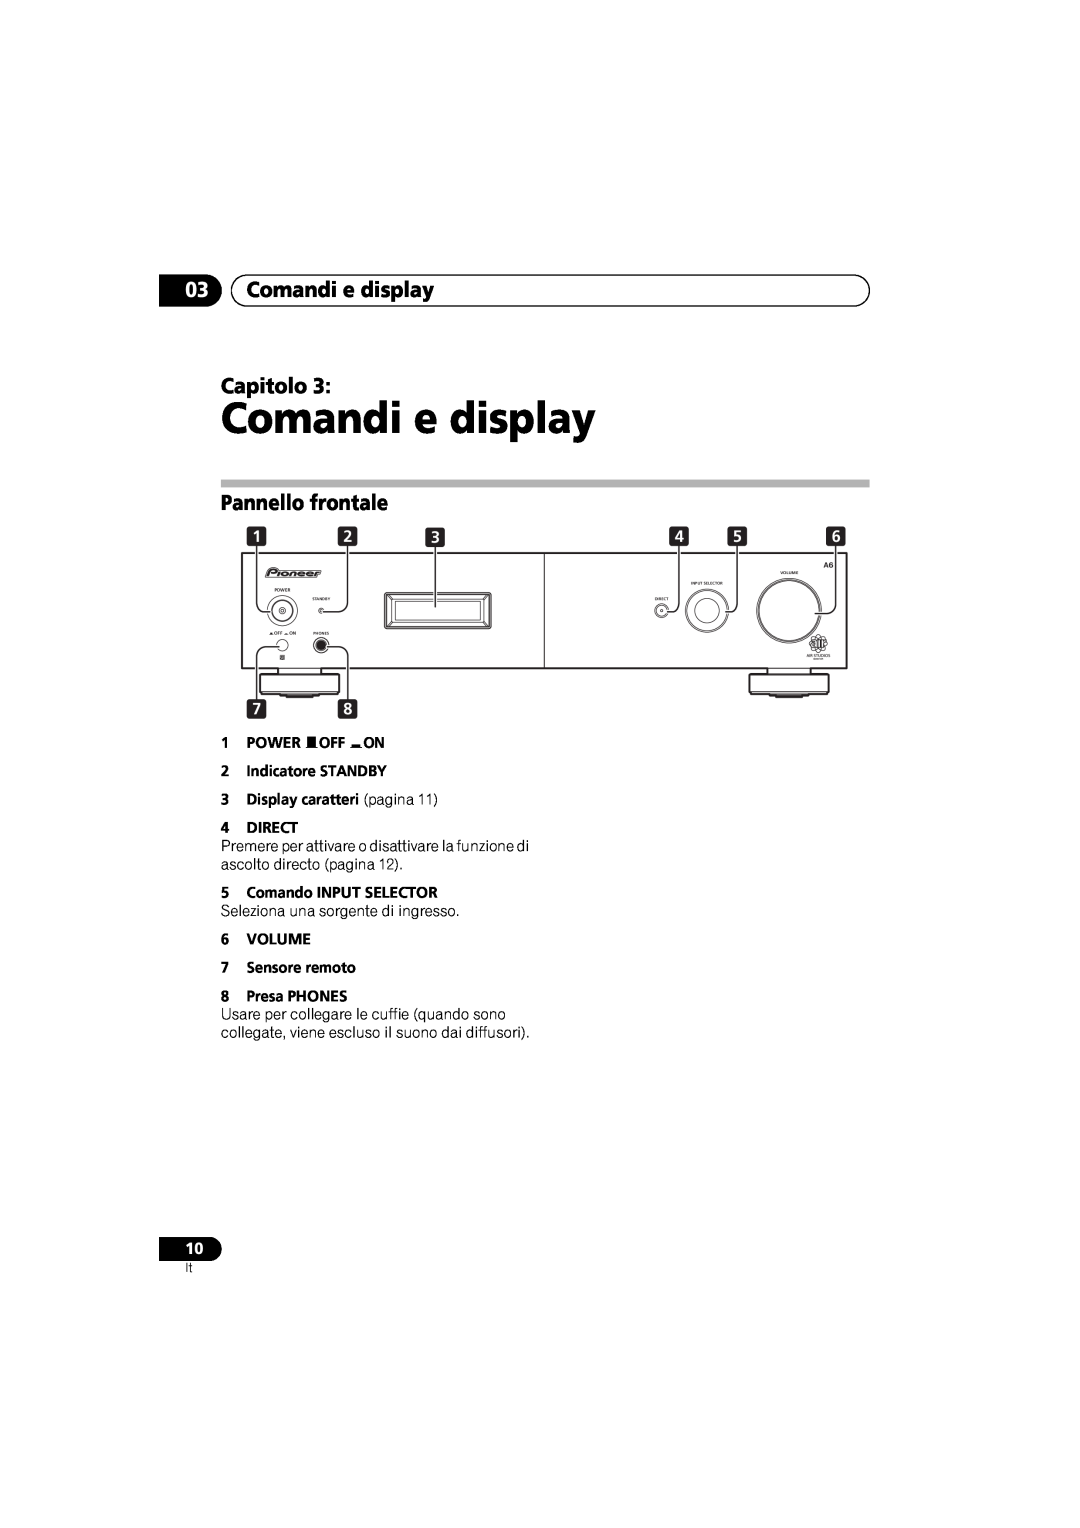 Pioneer A-A6-J manual 03Comandi e display Capitolo, Pannello frontale, 1POWER OFF ON 2Indicatore STANDBY 